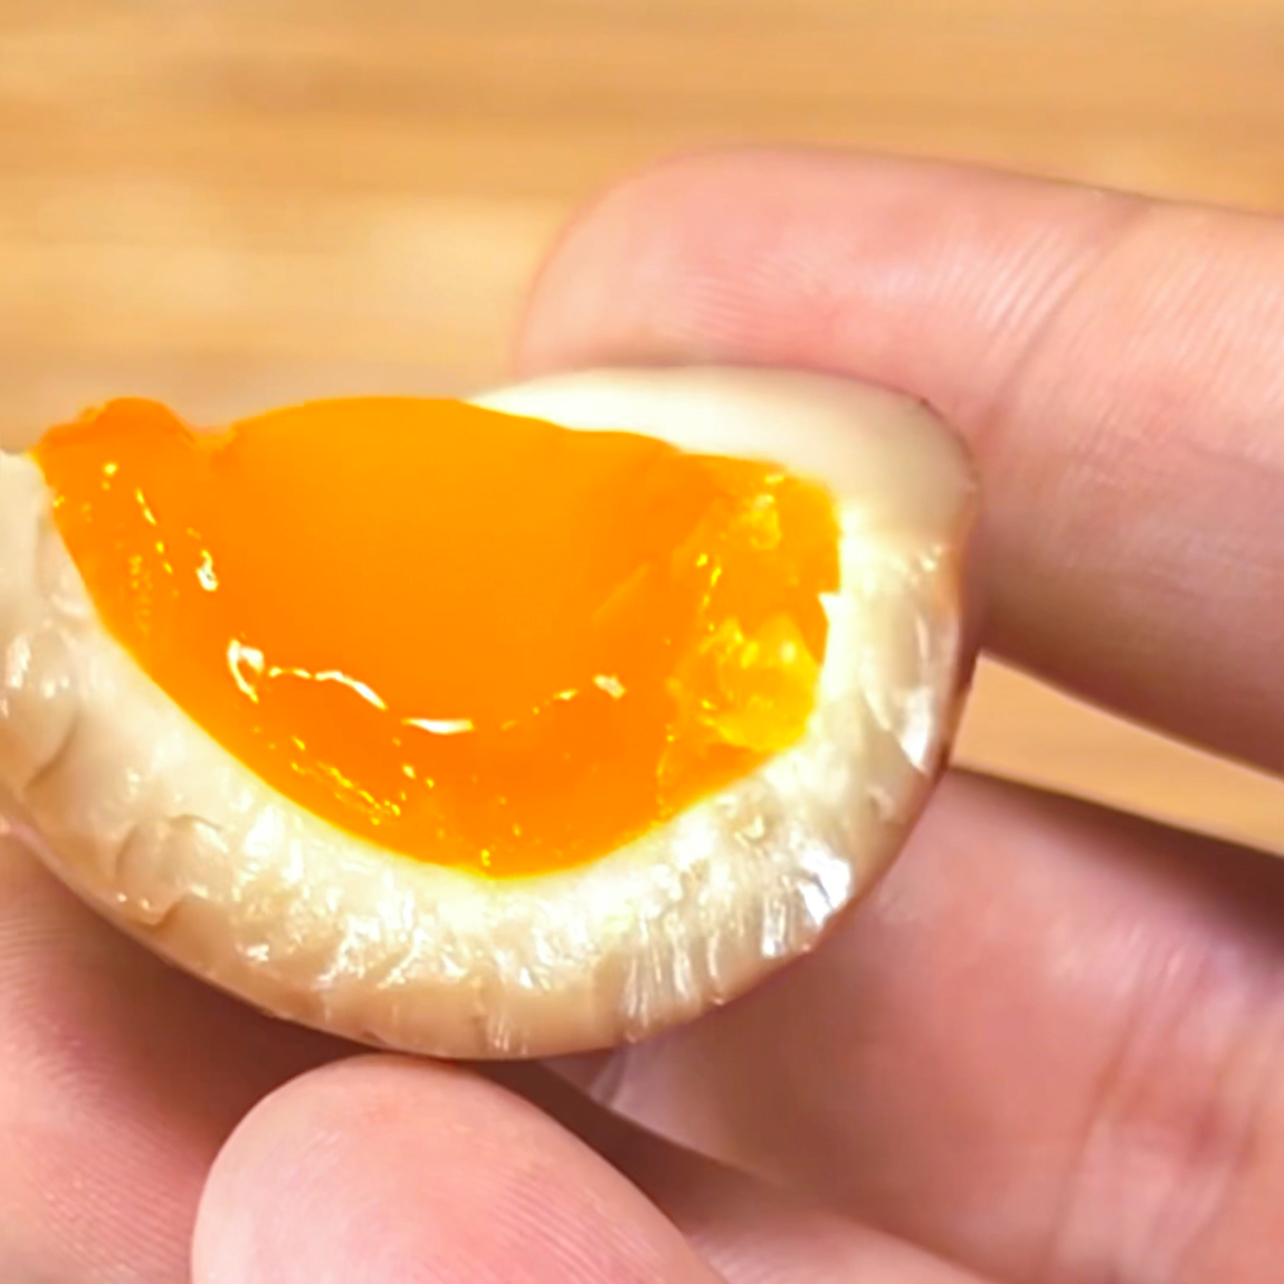 ramen egg recipe - holding a half of a ramen egg after taking a bite to see the cross section of the white and yolk